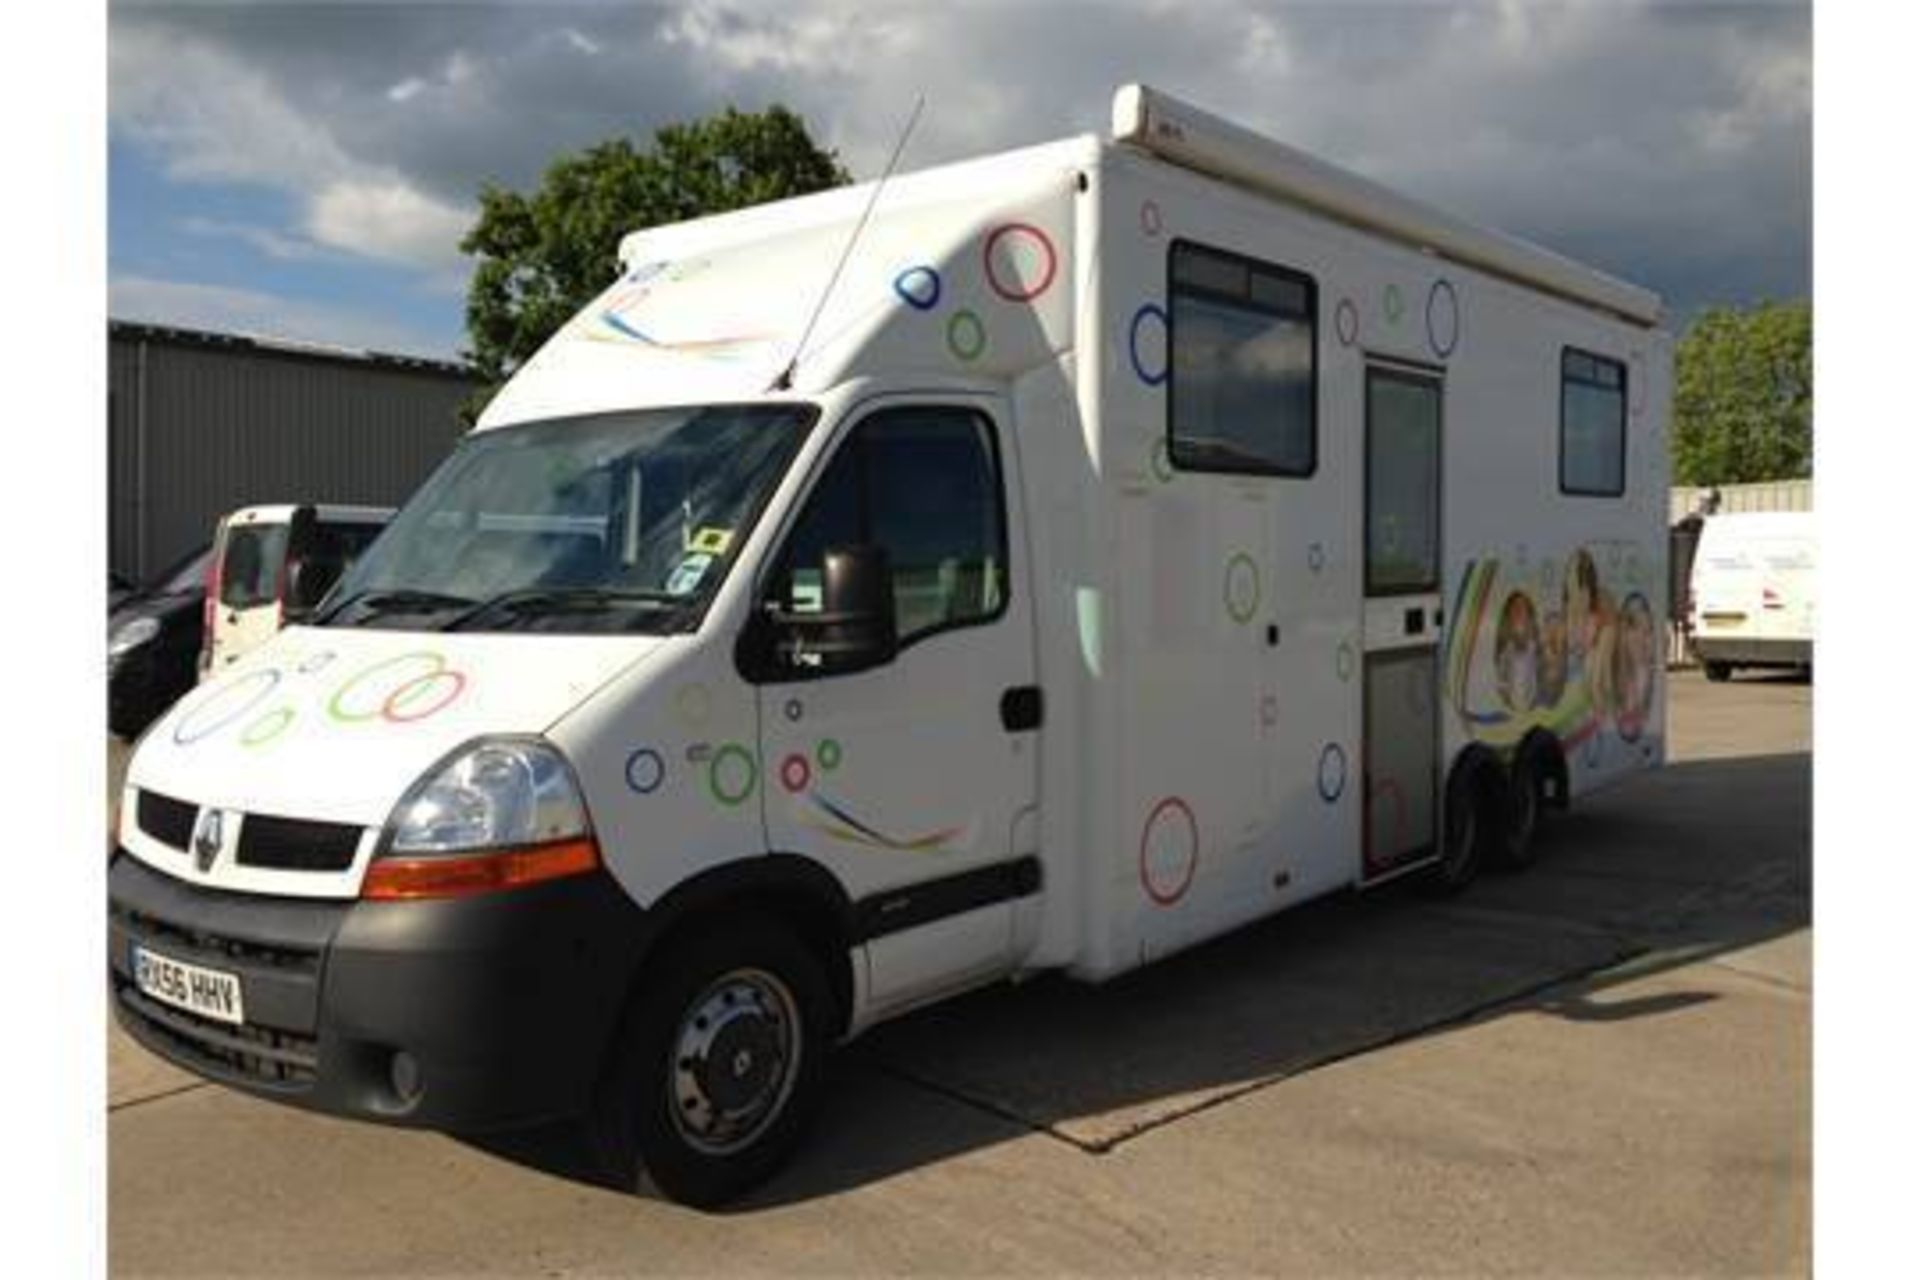 SUPERB 2006 56 REG MOBILE OFFICE ** COST OVER £120k To CONVERT **...